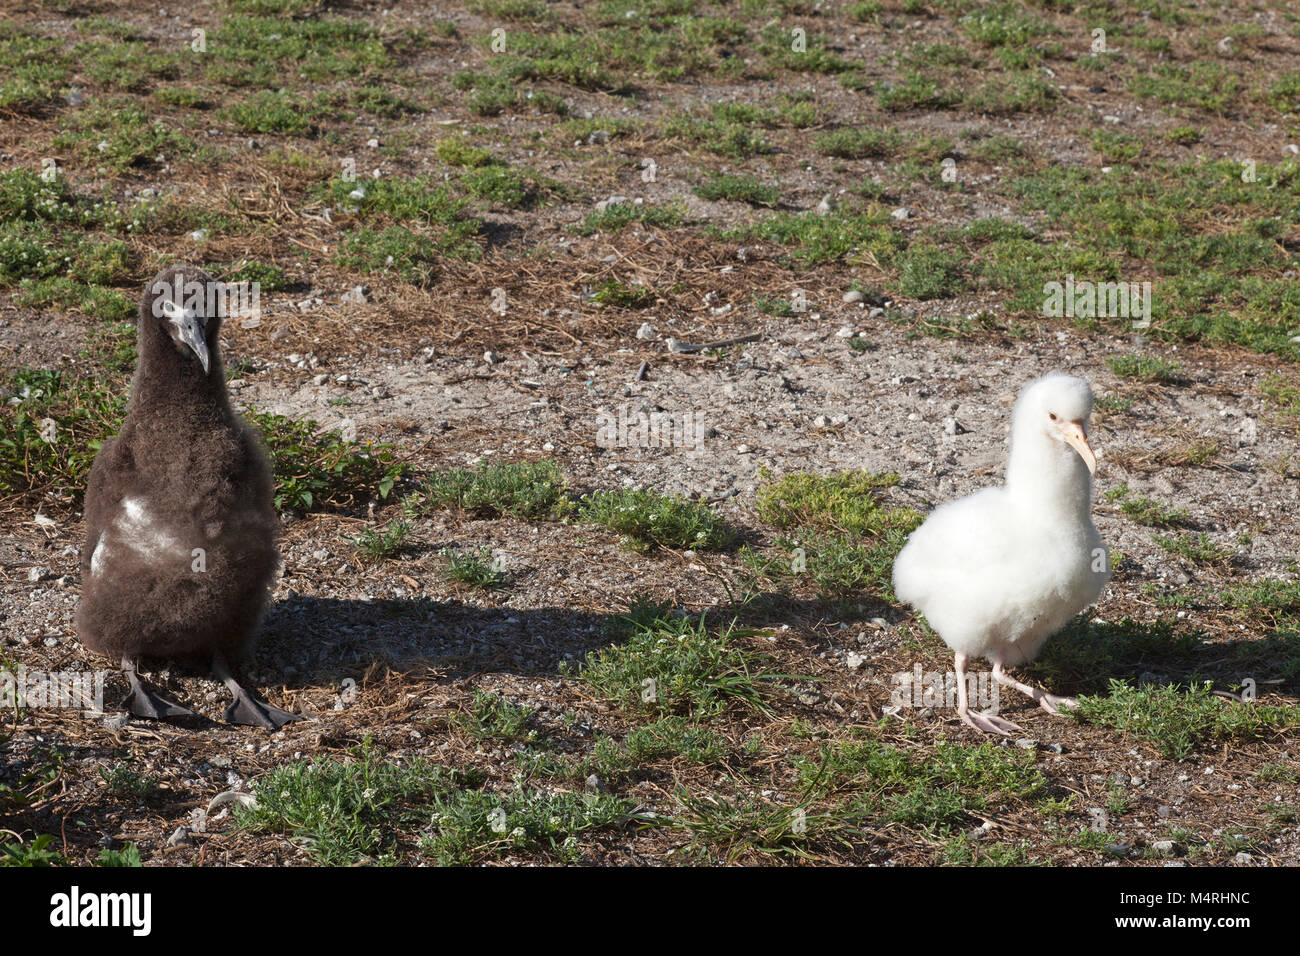 Laysan Albatross brown chick beside white leucistic chick lacking the normal pigmentation on Midway Atoll. Phoebastria immutabilis Stock Photo